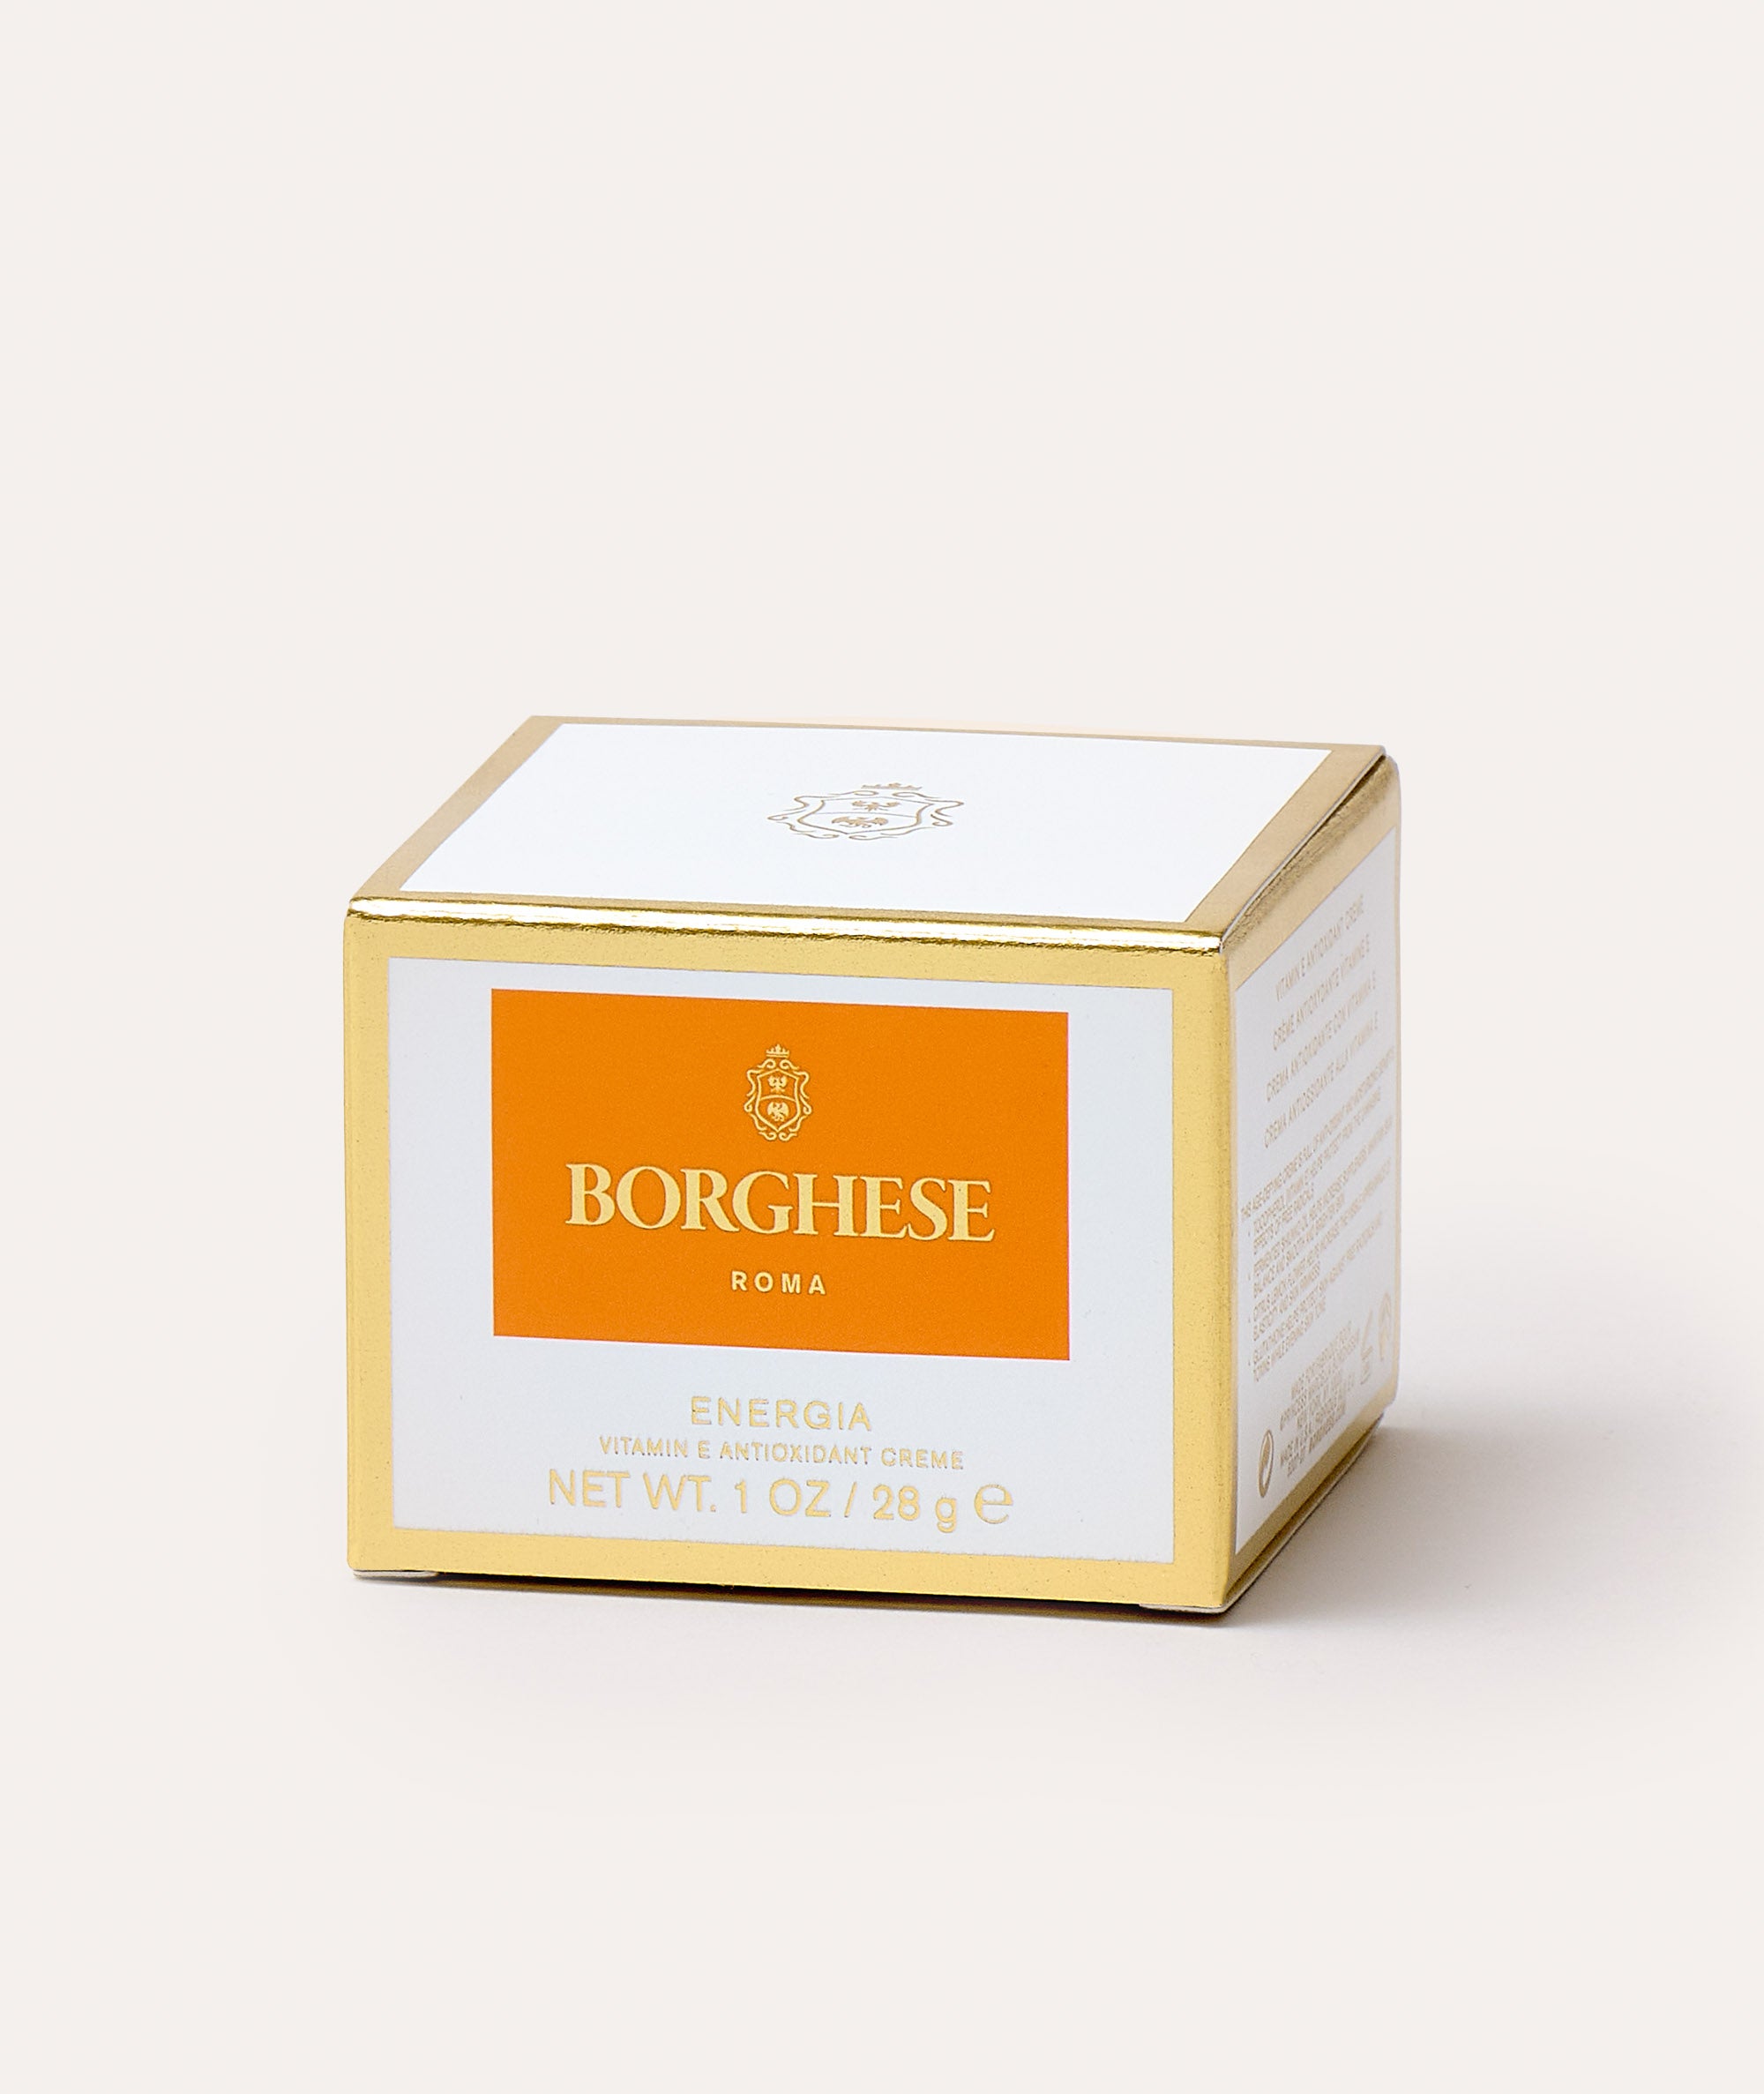 This is a picture of Borghese ENERGIA Vitamin E Antioxidant Creme box